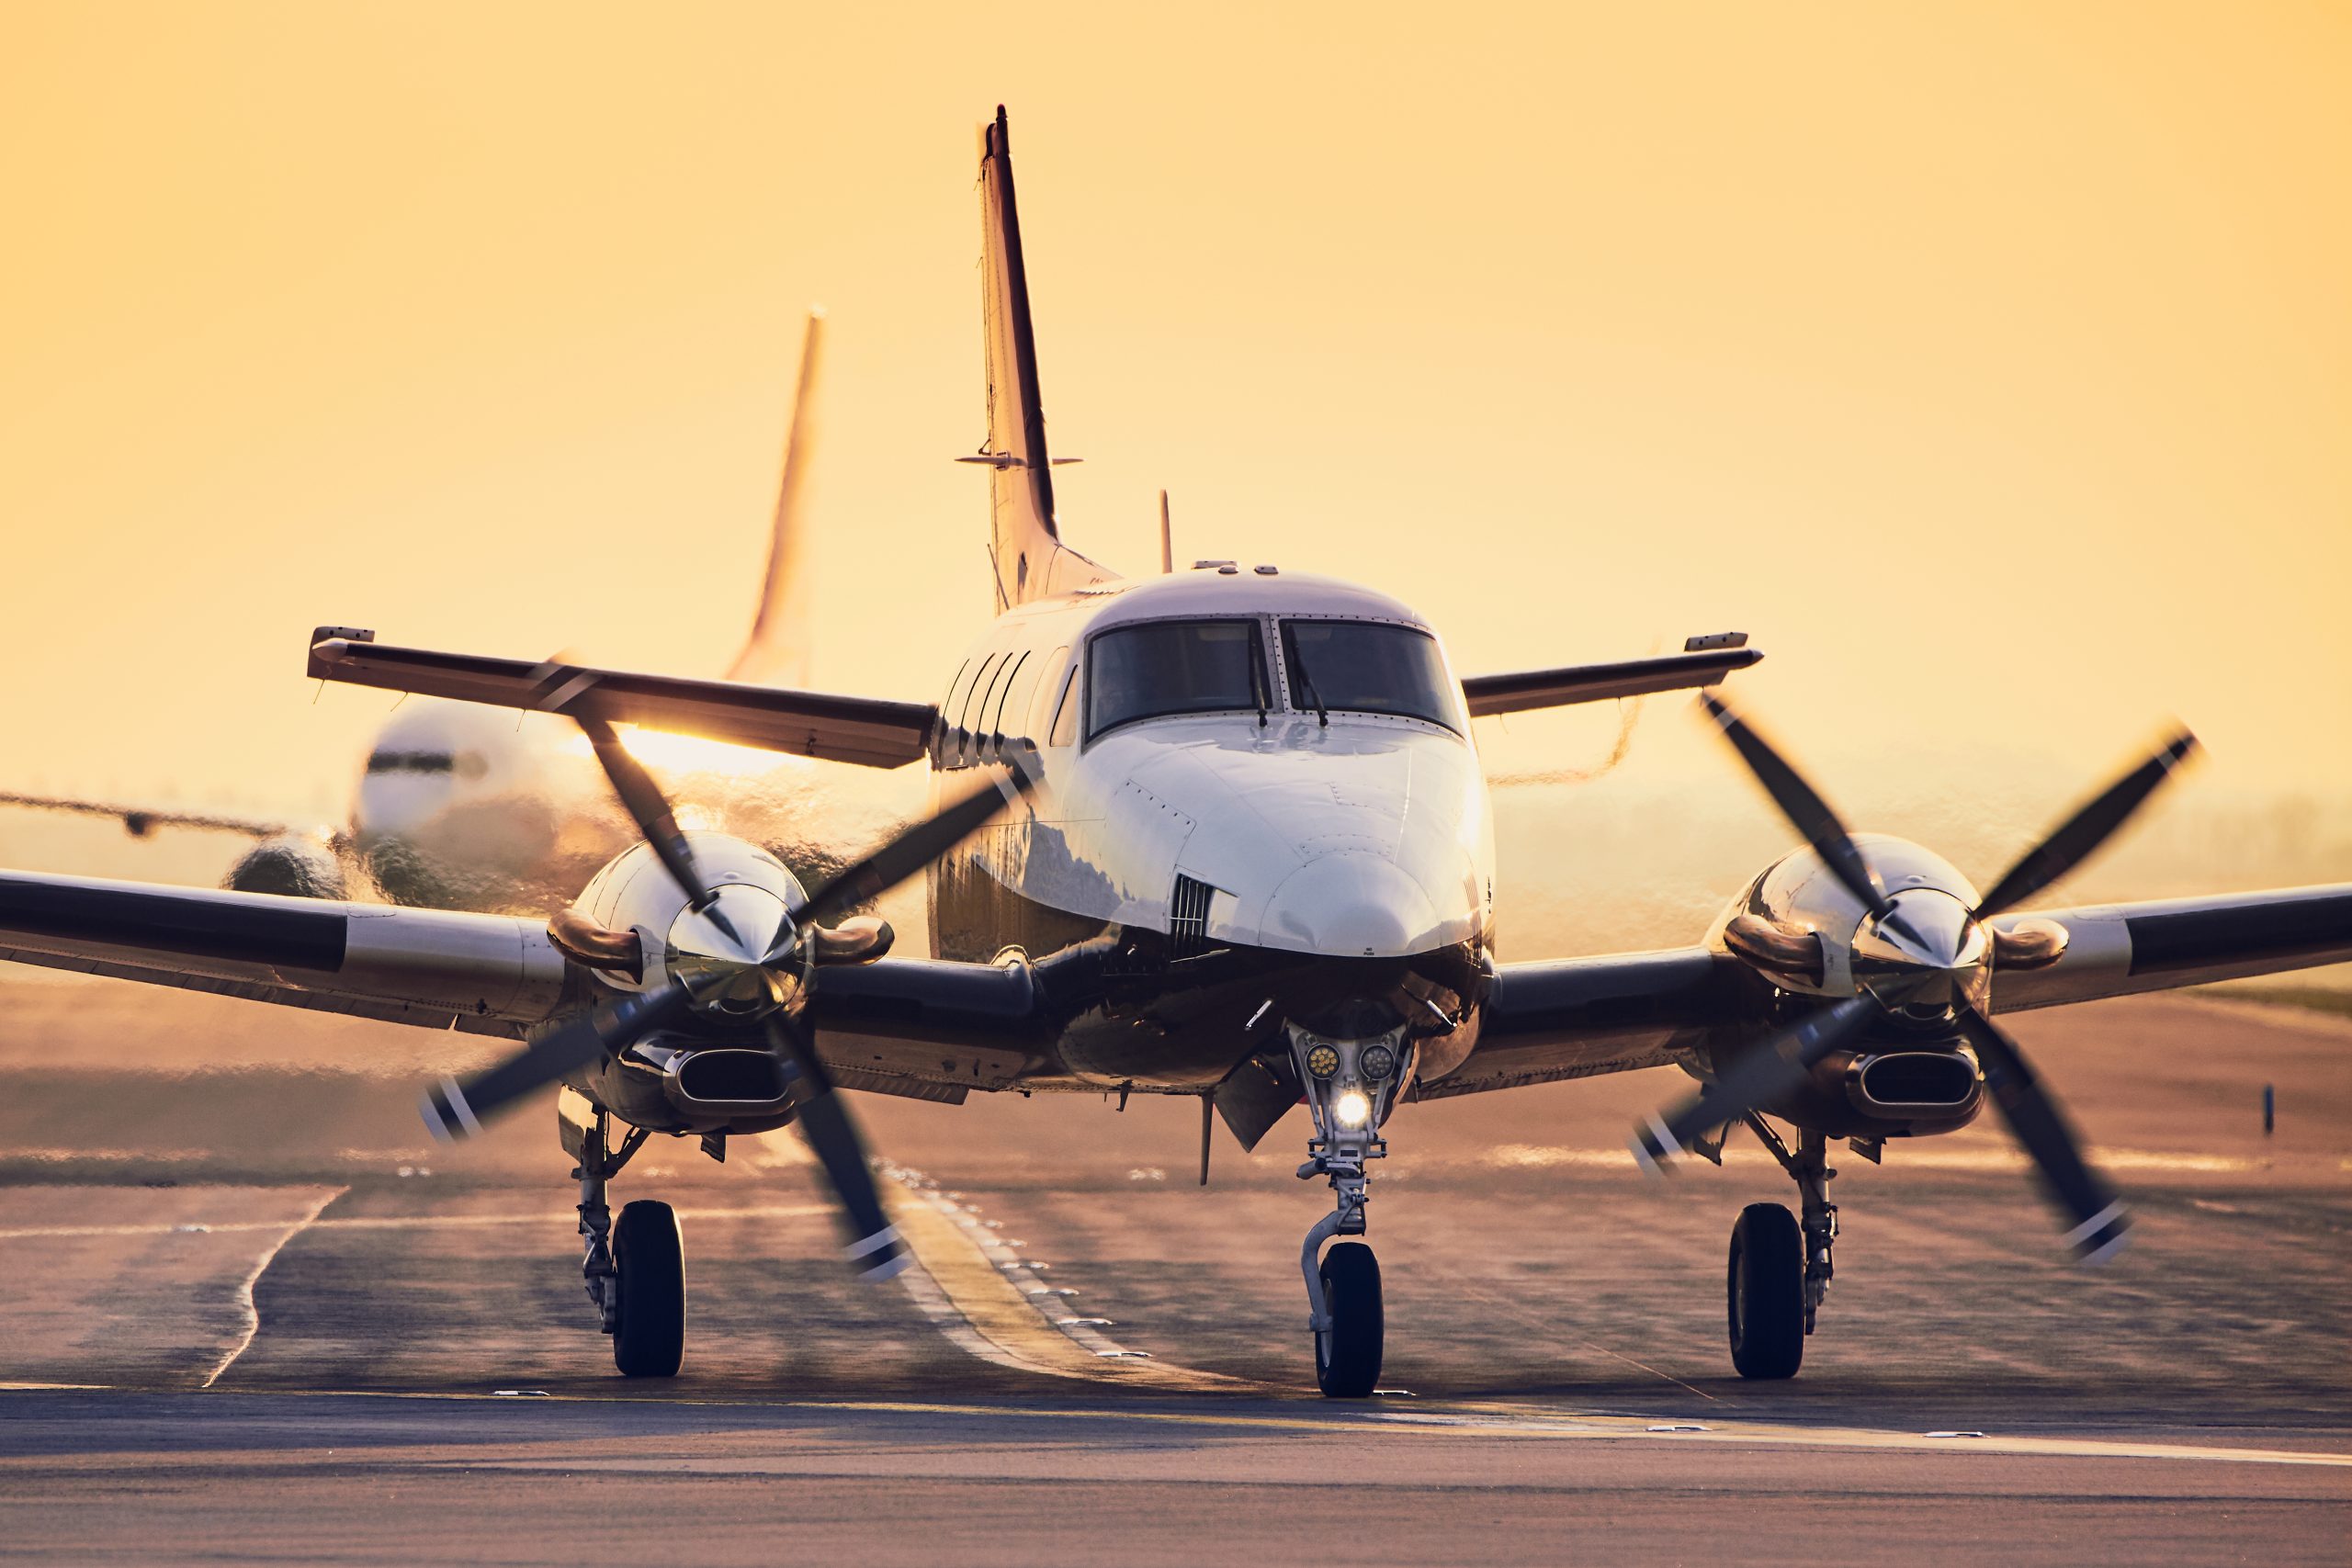 Modern propeller plane against commercial airplane on runway. Traffic at airport during sunset.